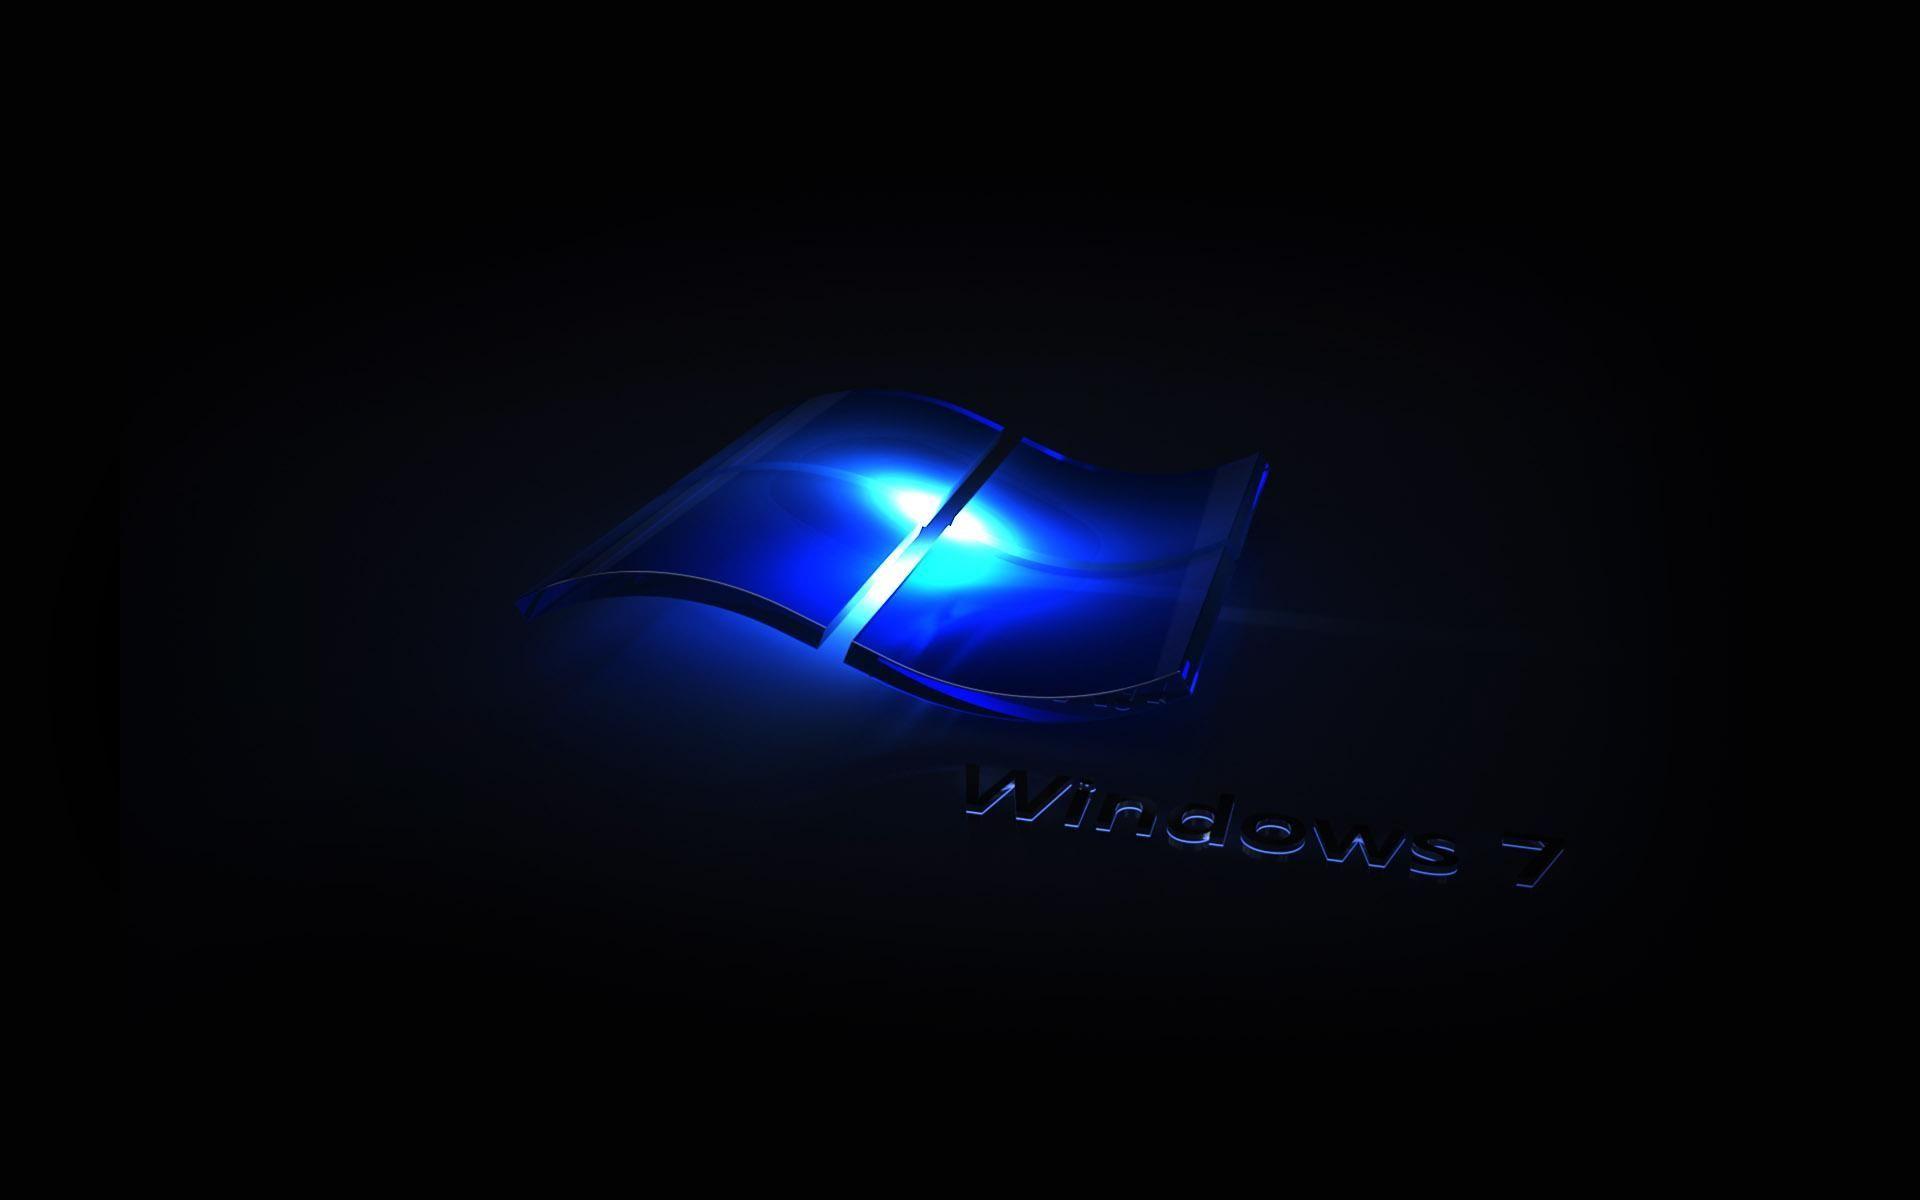 Official Windows 7 Wallpapers - Wallpaper Cave